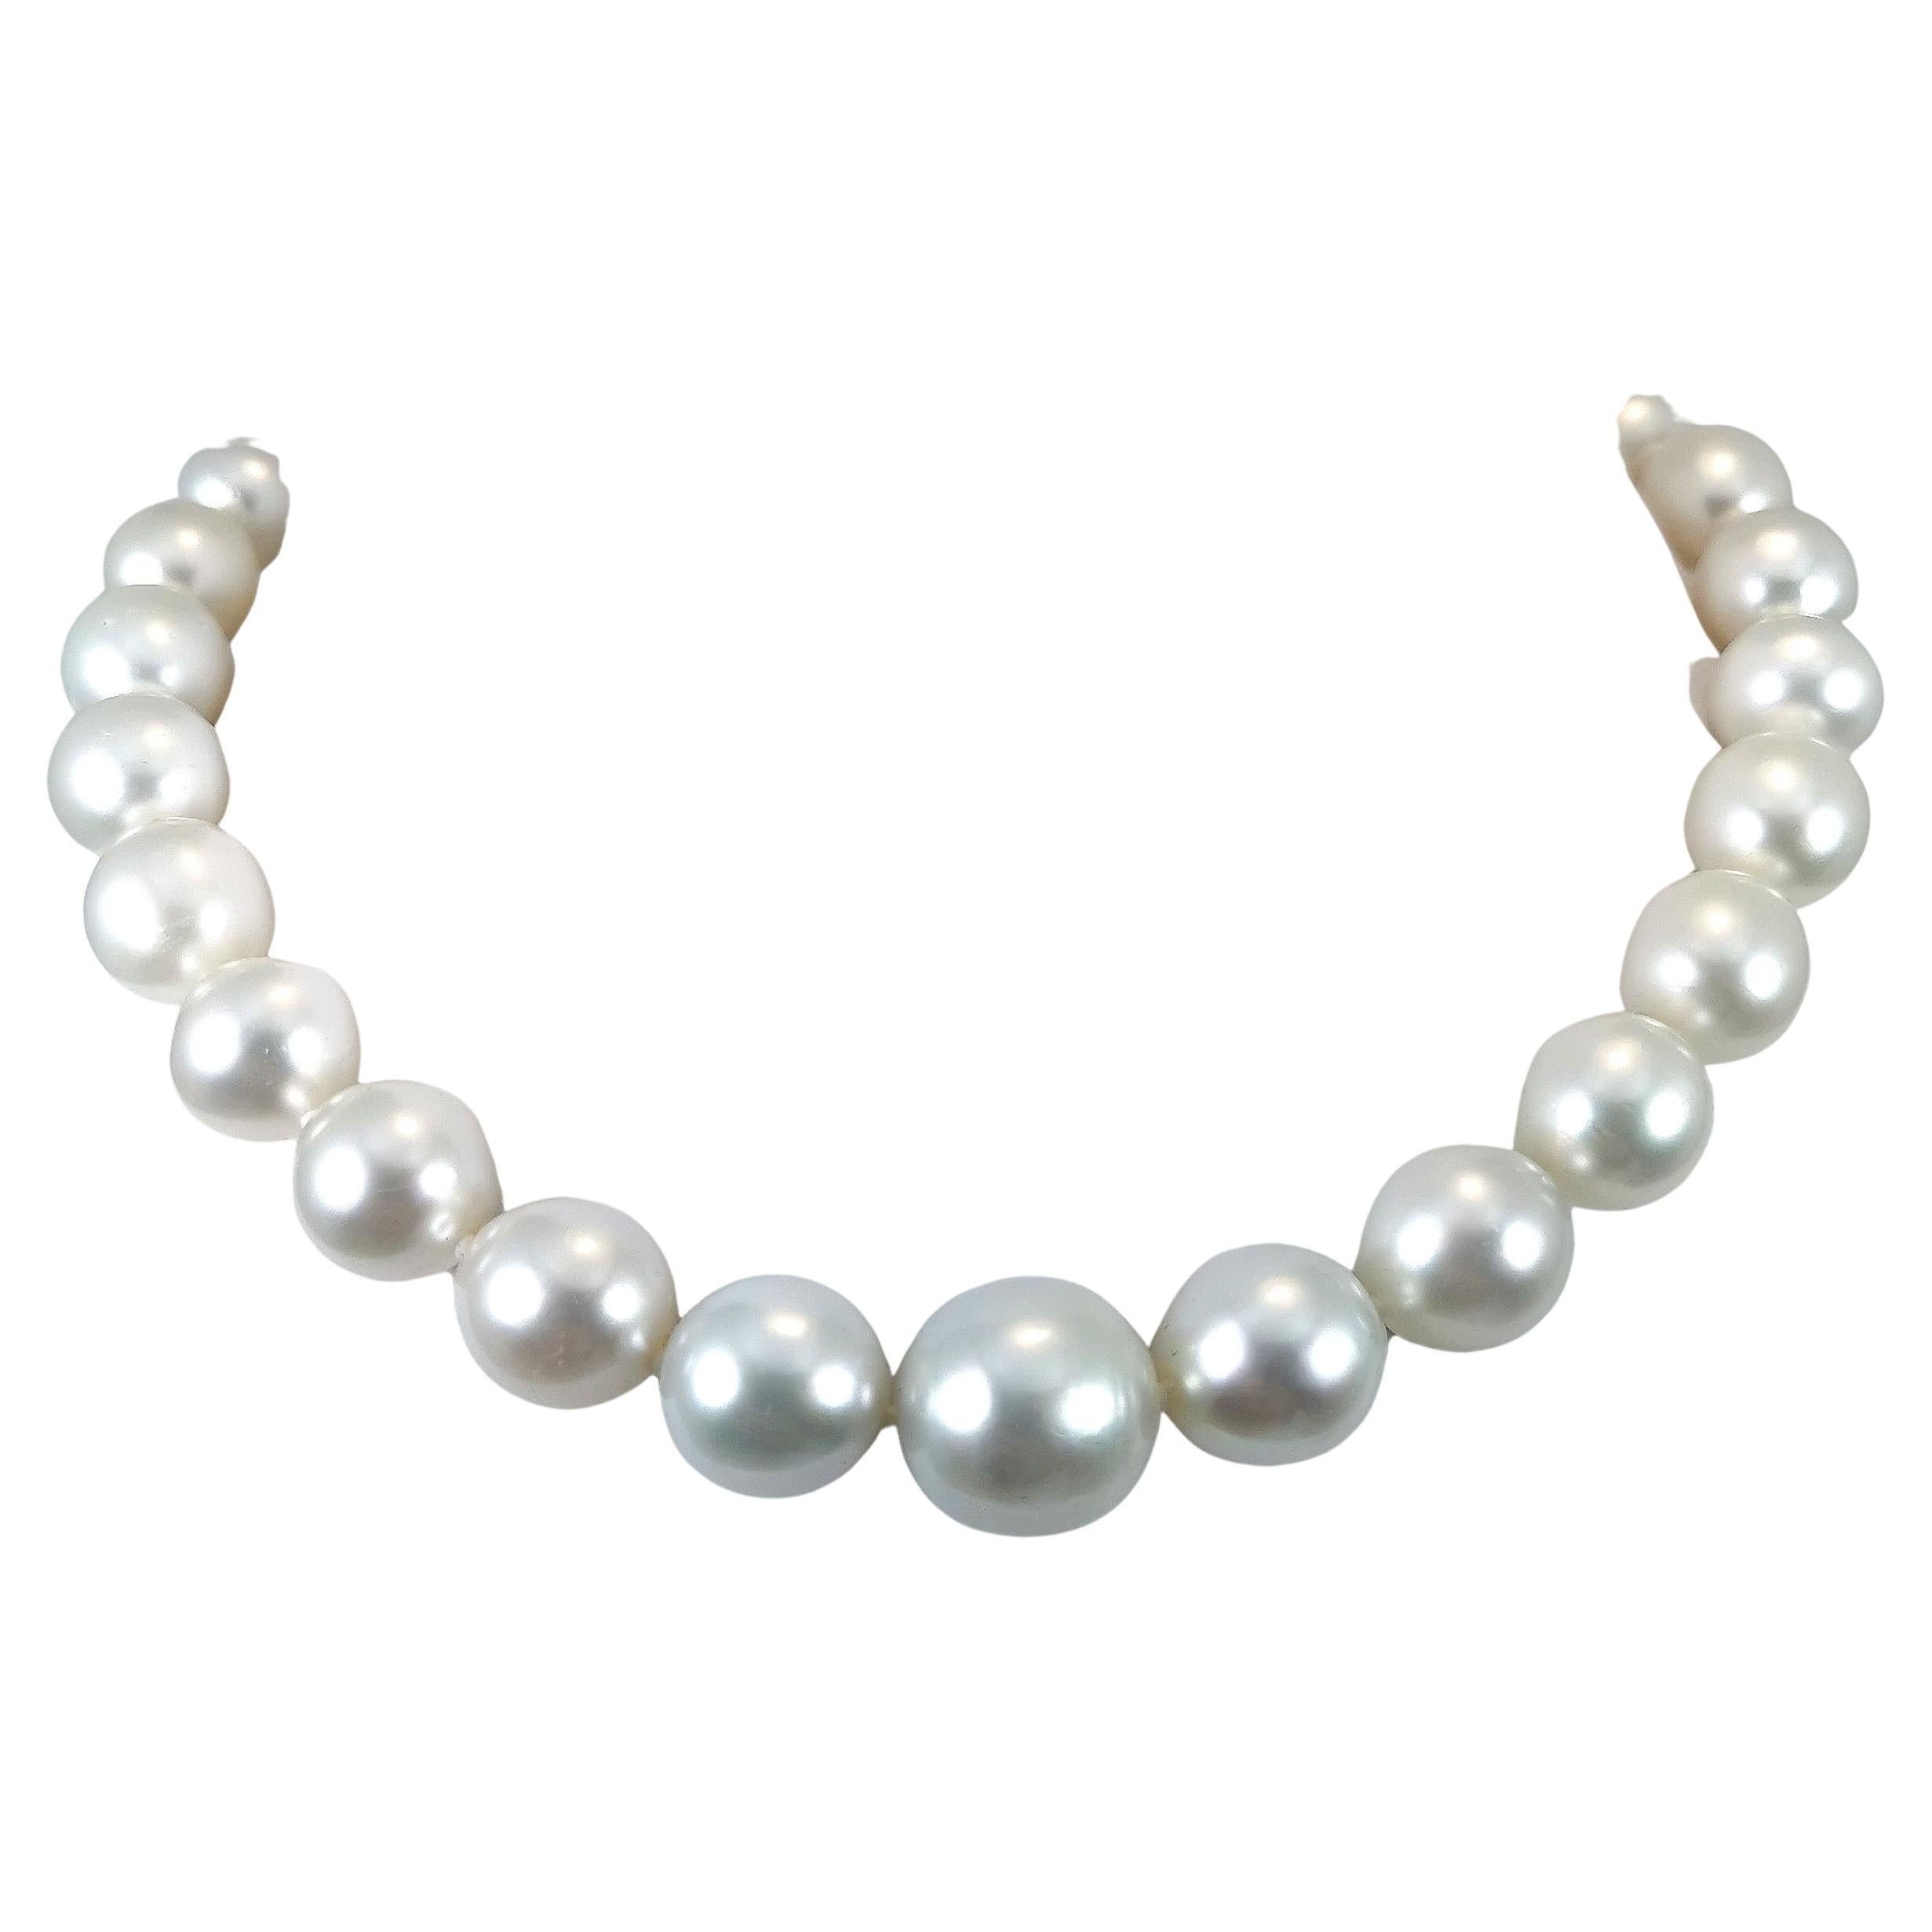 Huge Southsea pearls Necklace with 925S. Clasp